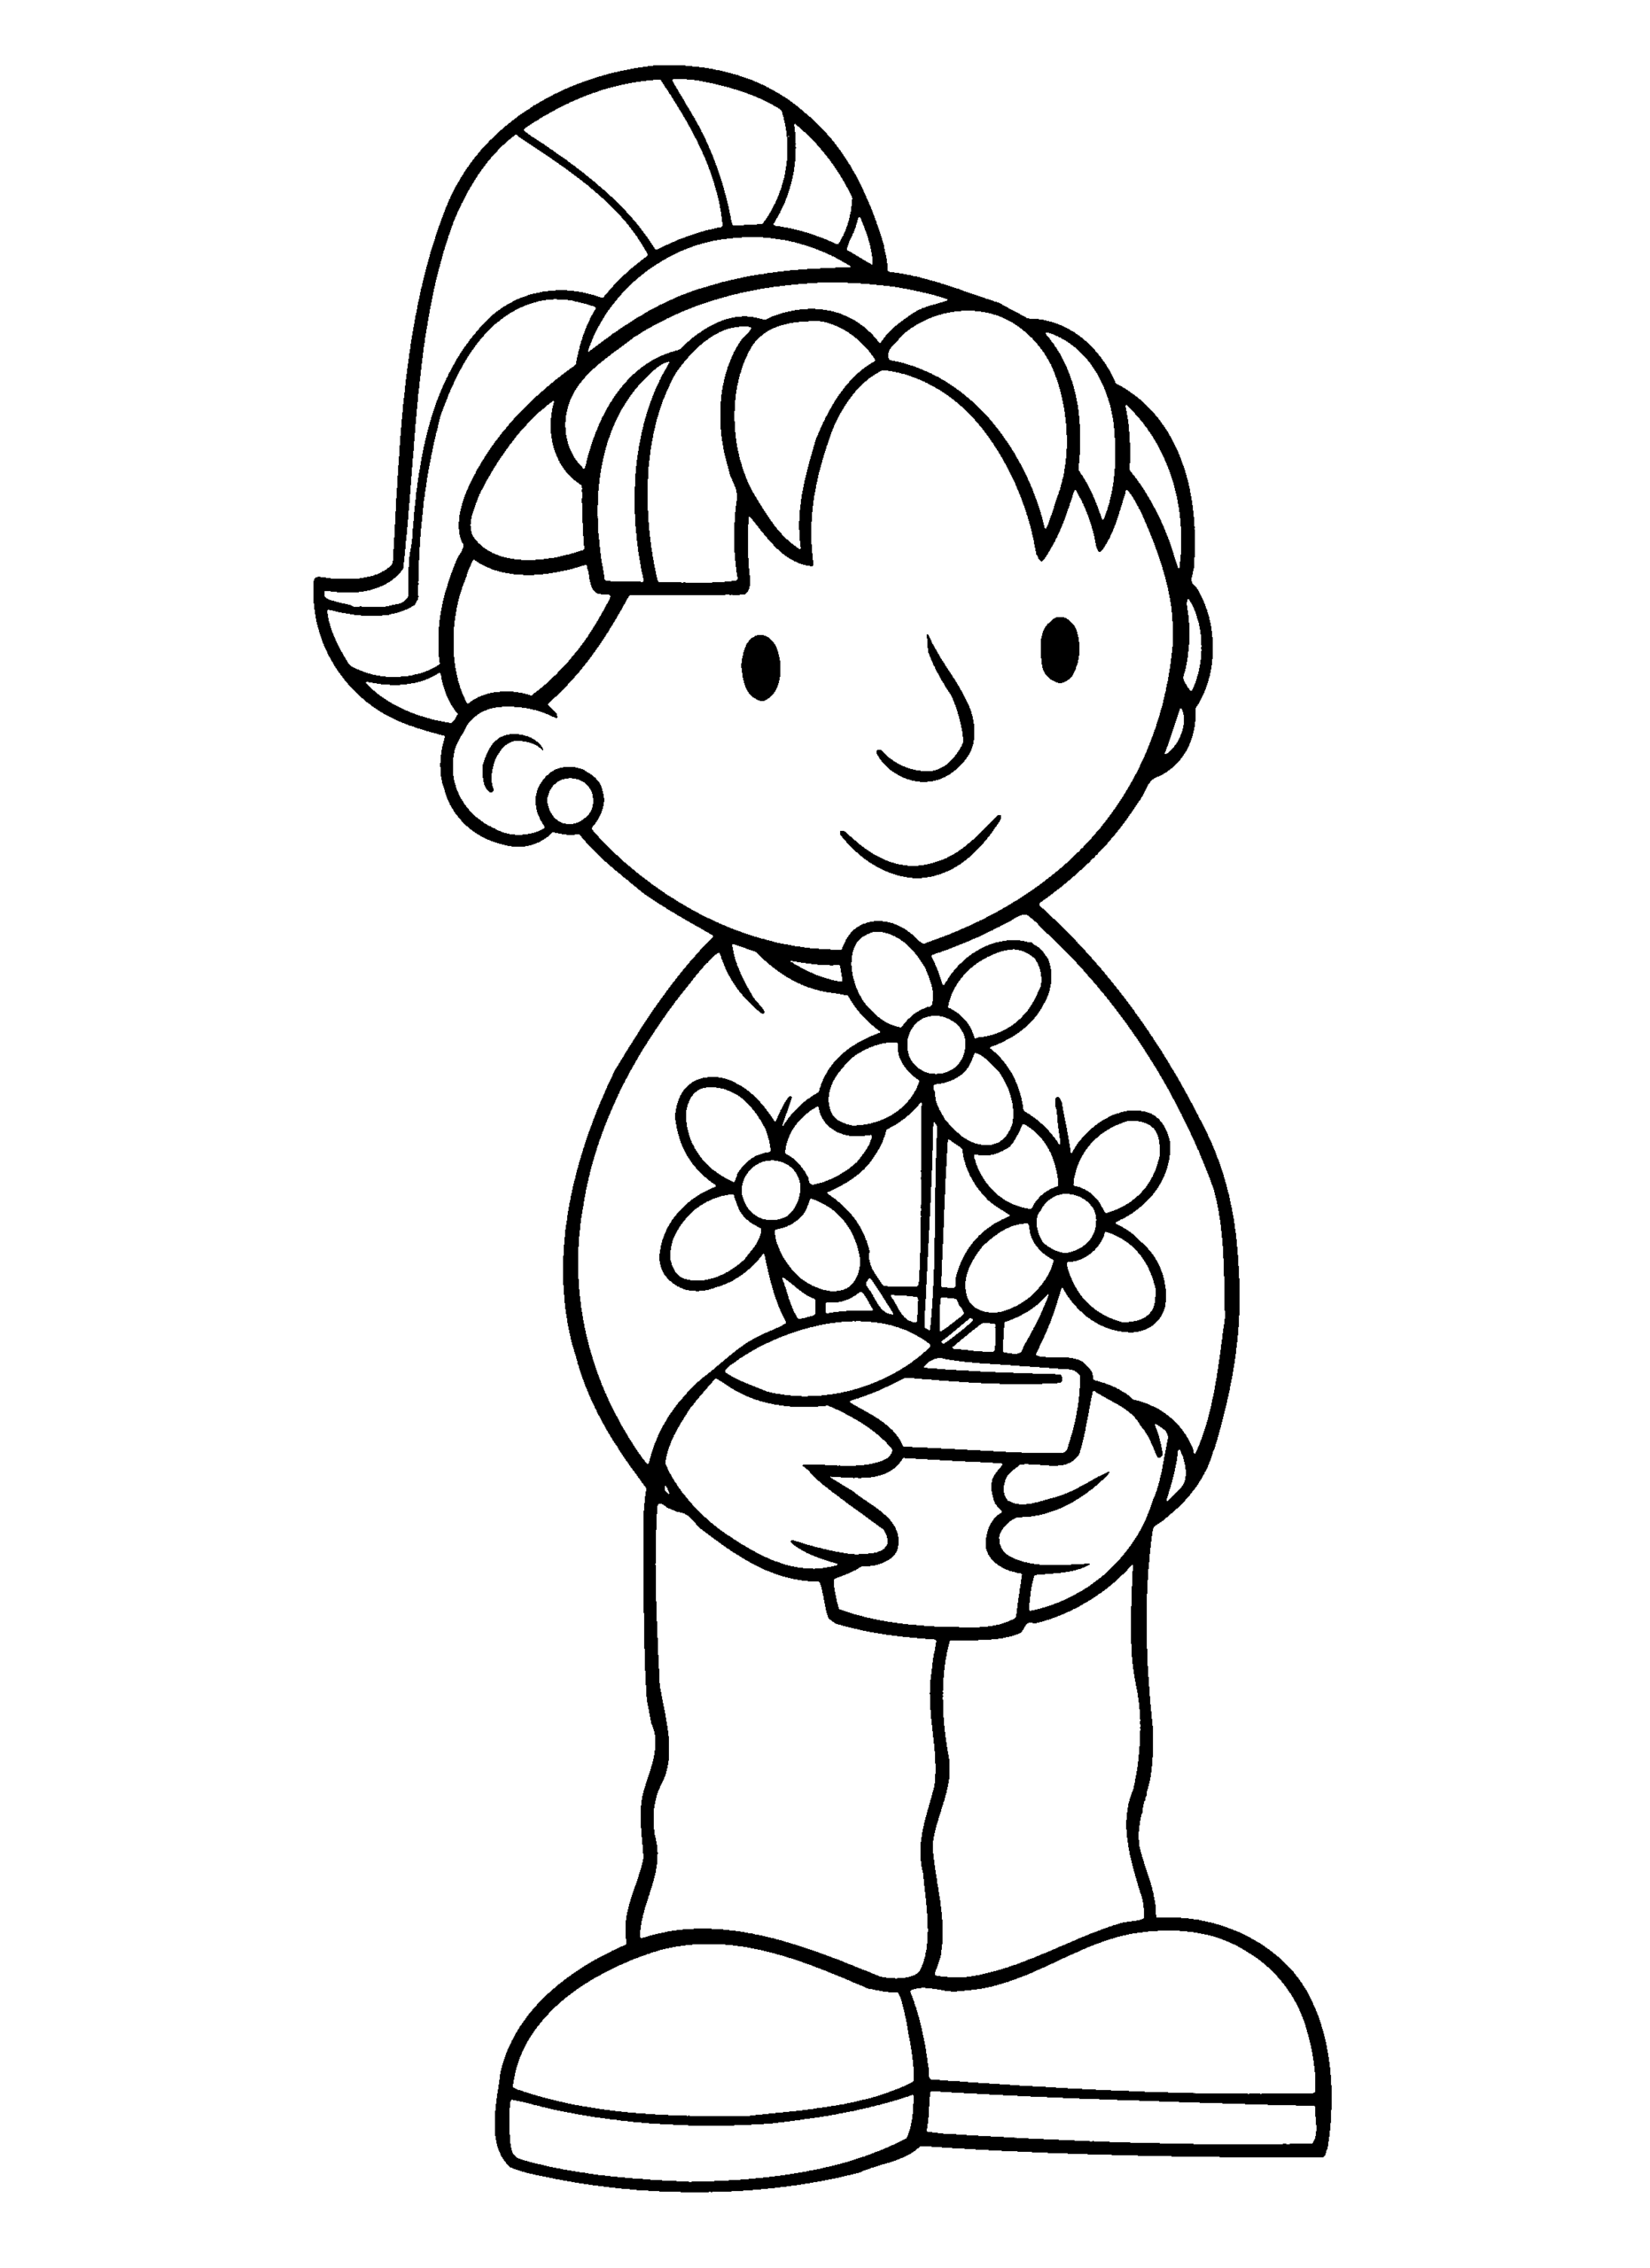 wendy from bob the builder coloring pages